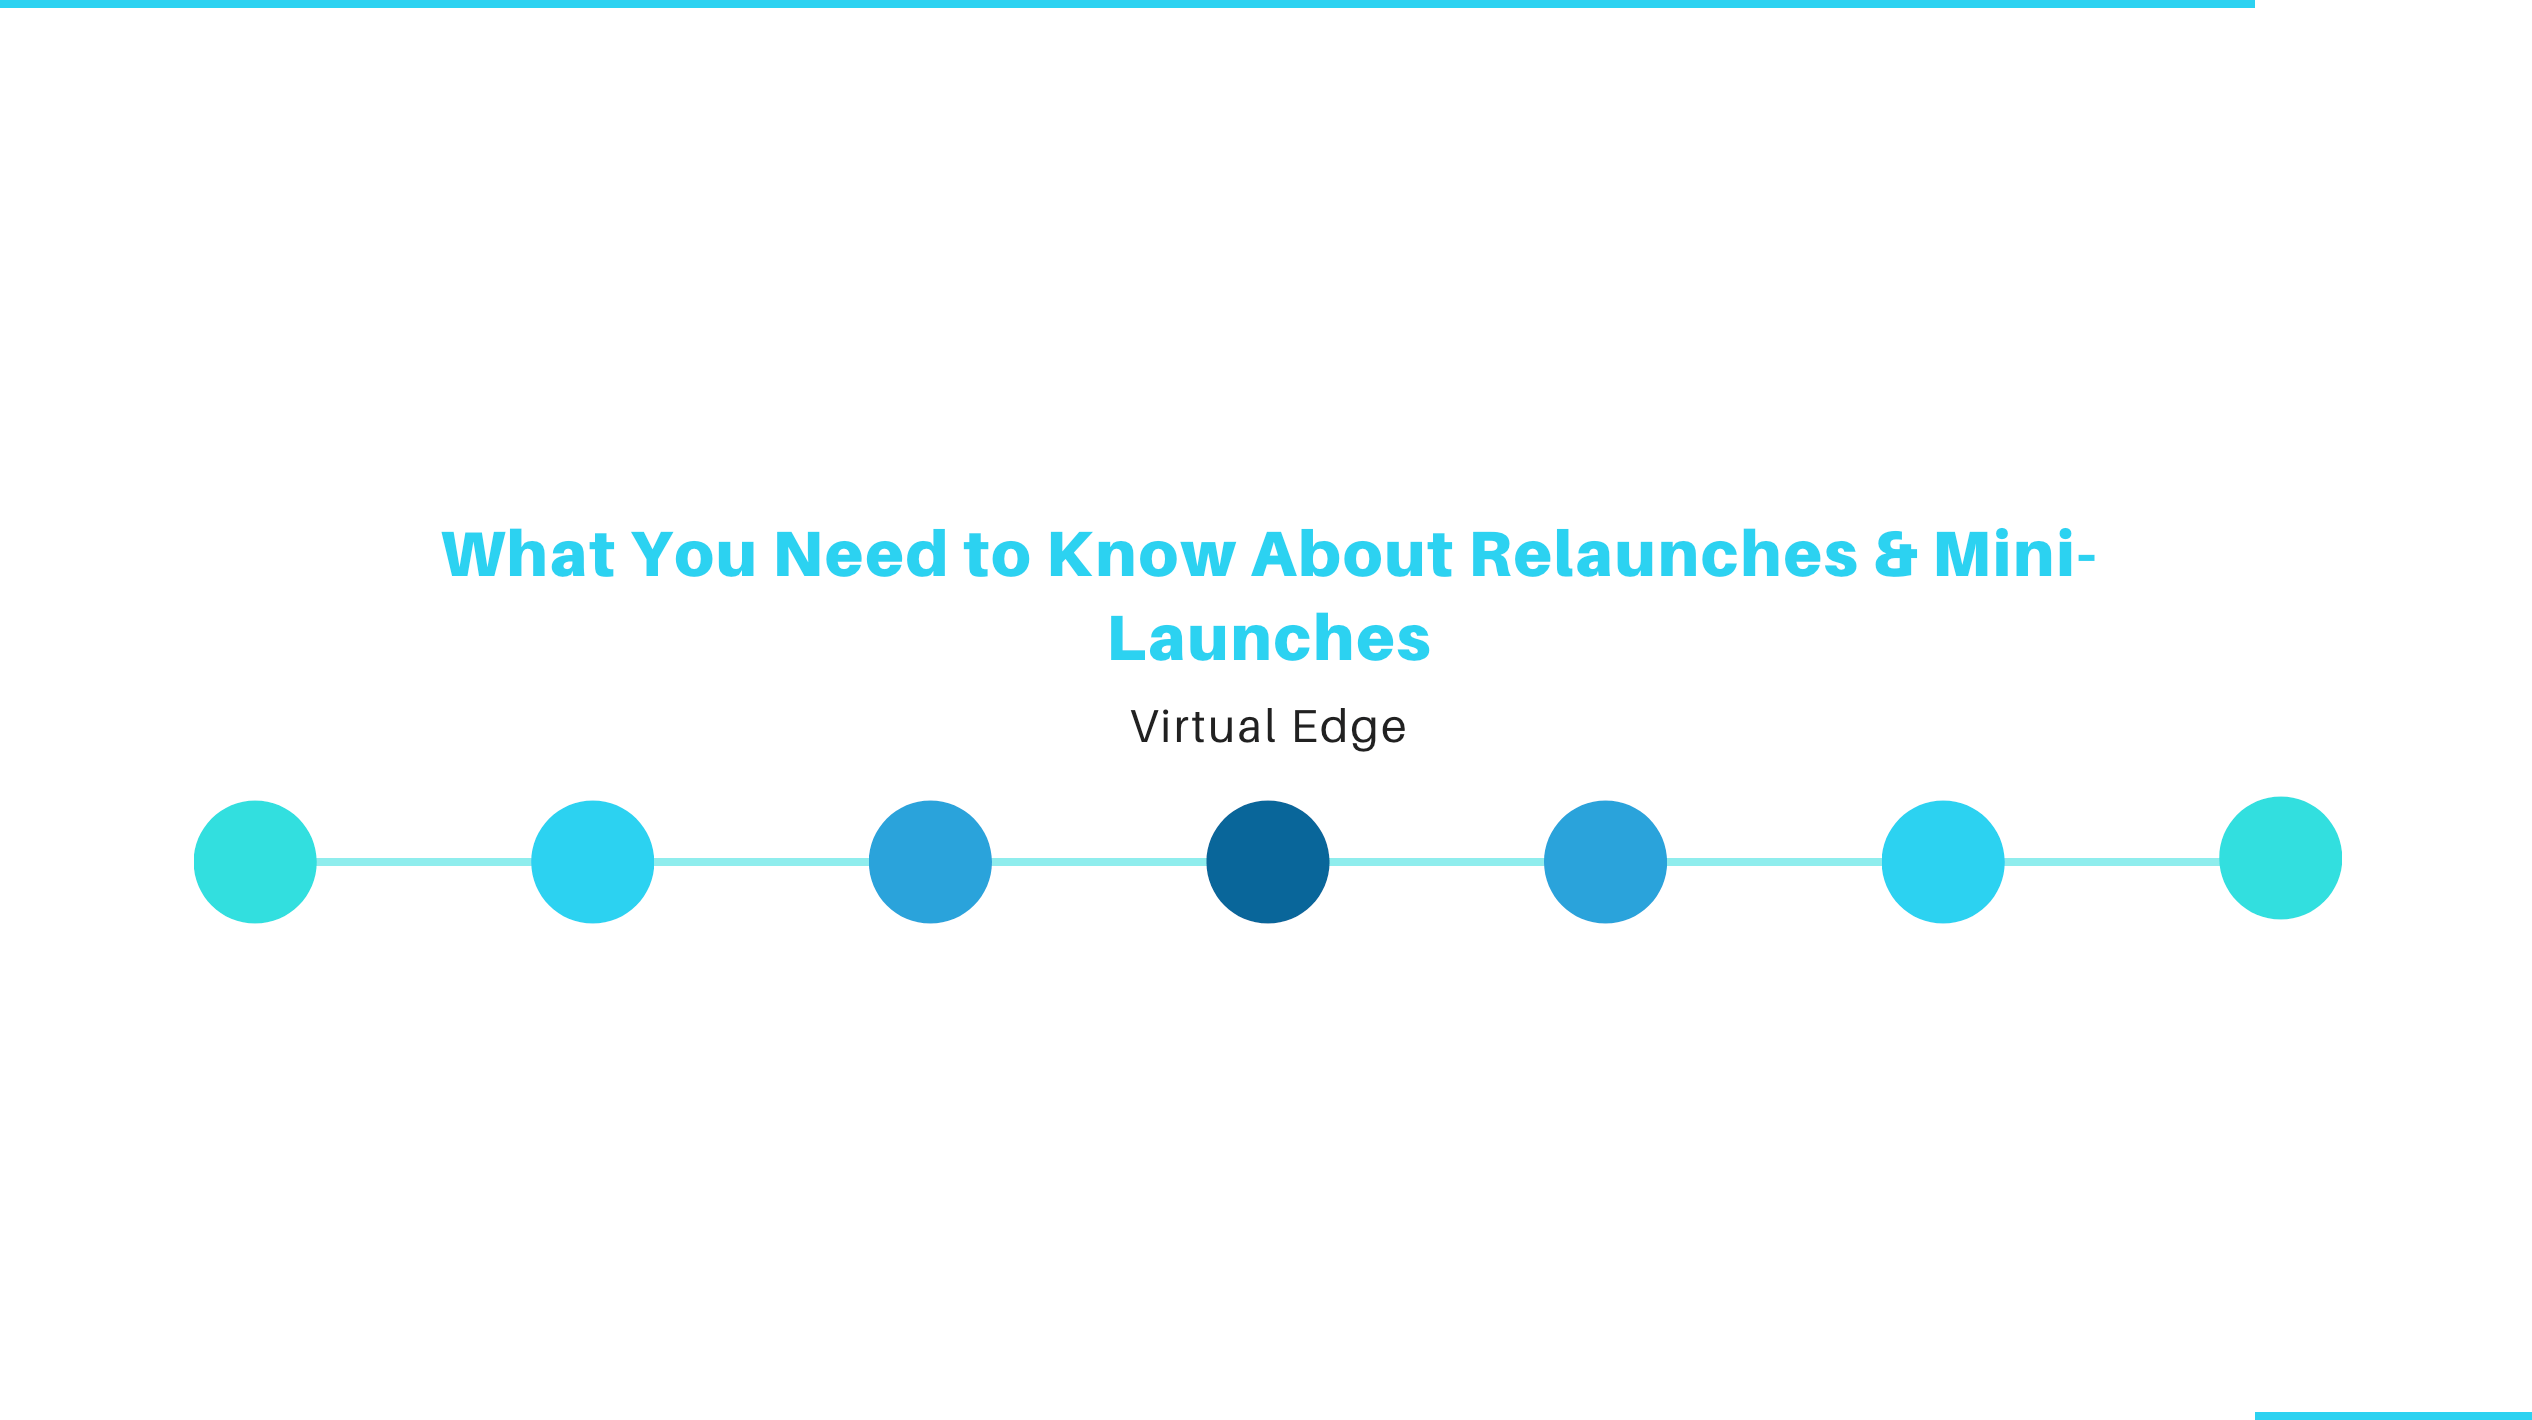 What You Need to Know About Relaunches & Mini-Launches